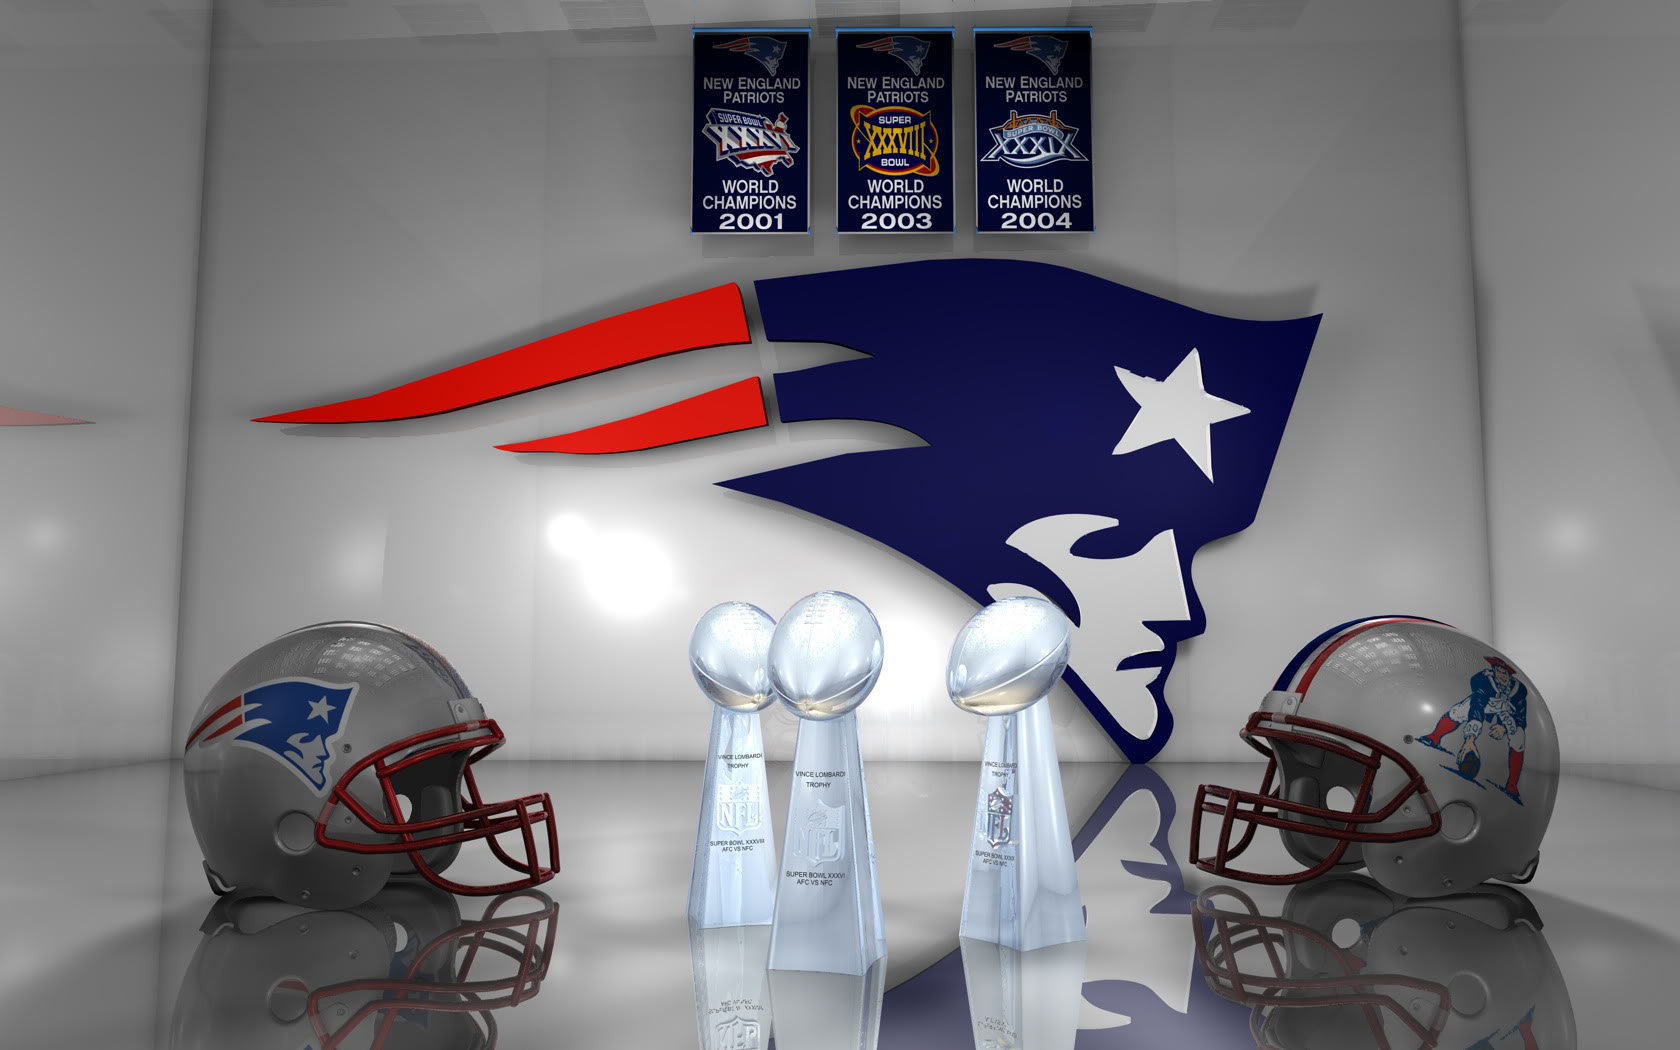  this New England Patriots background New England Patriots wallpapers